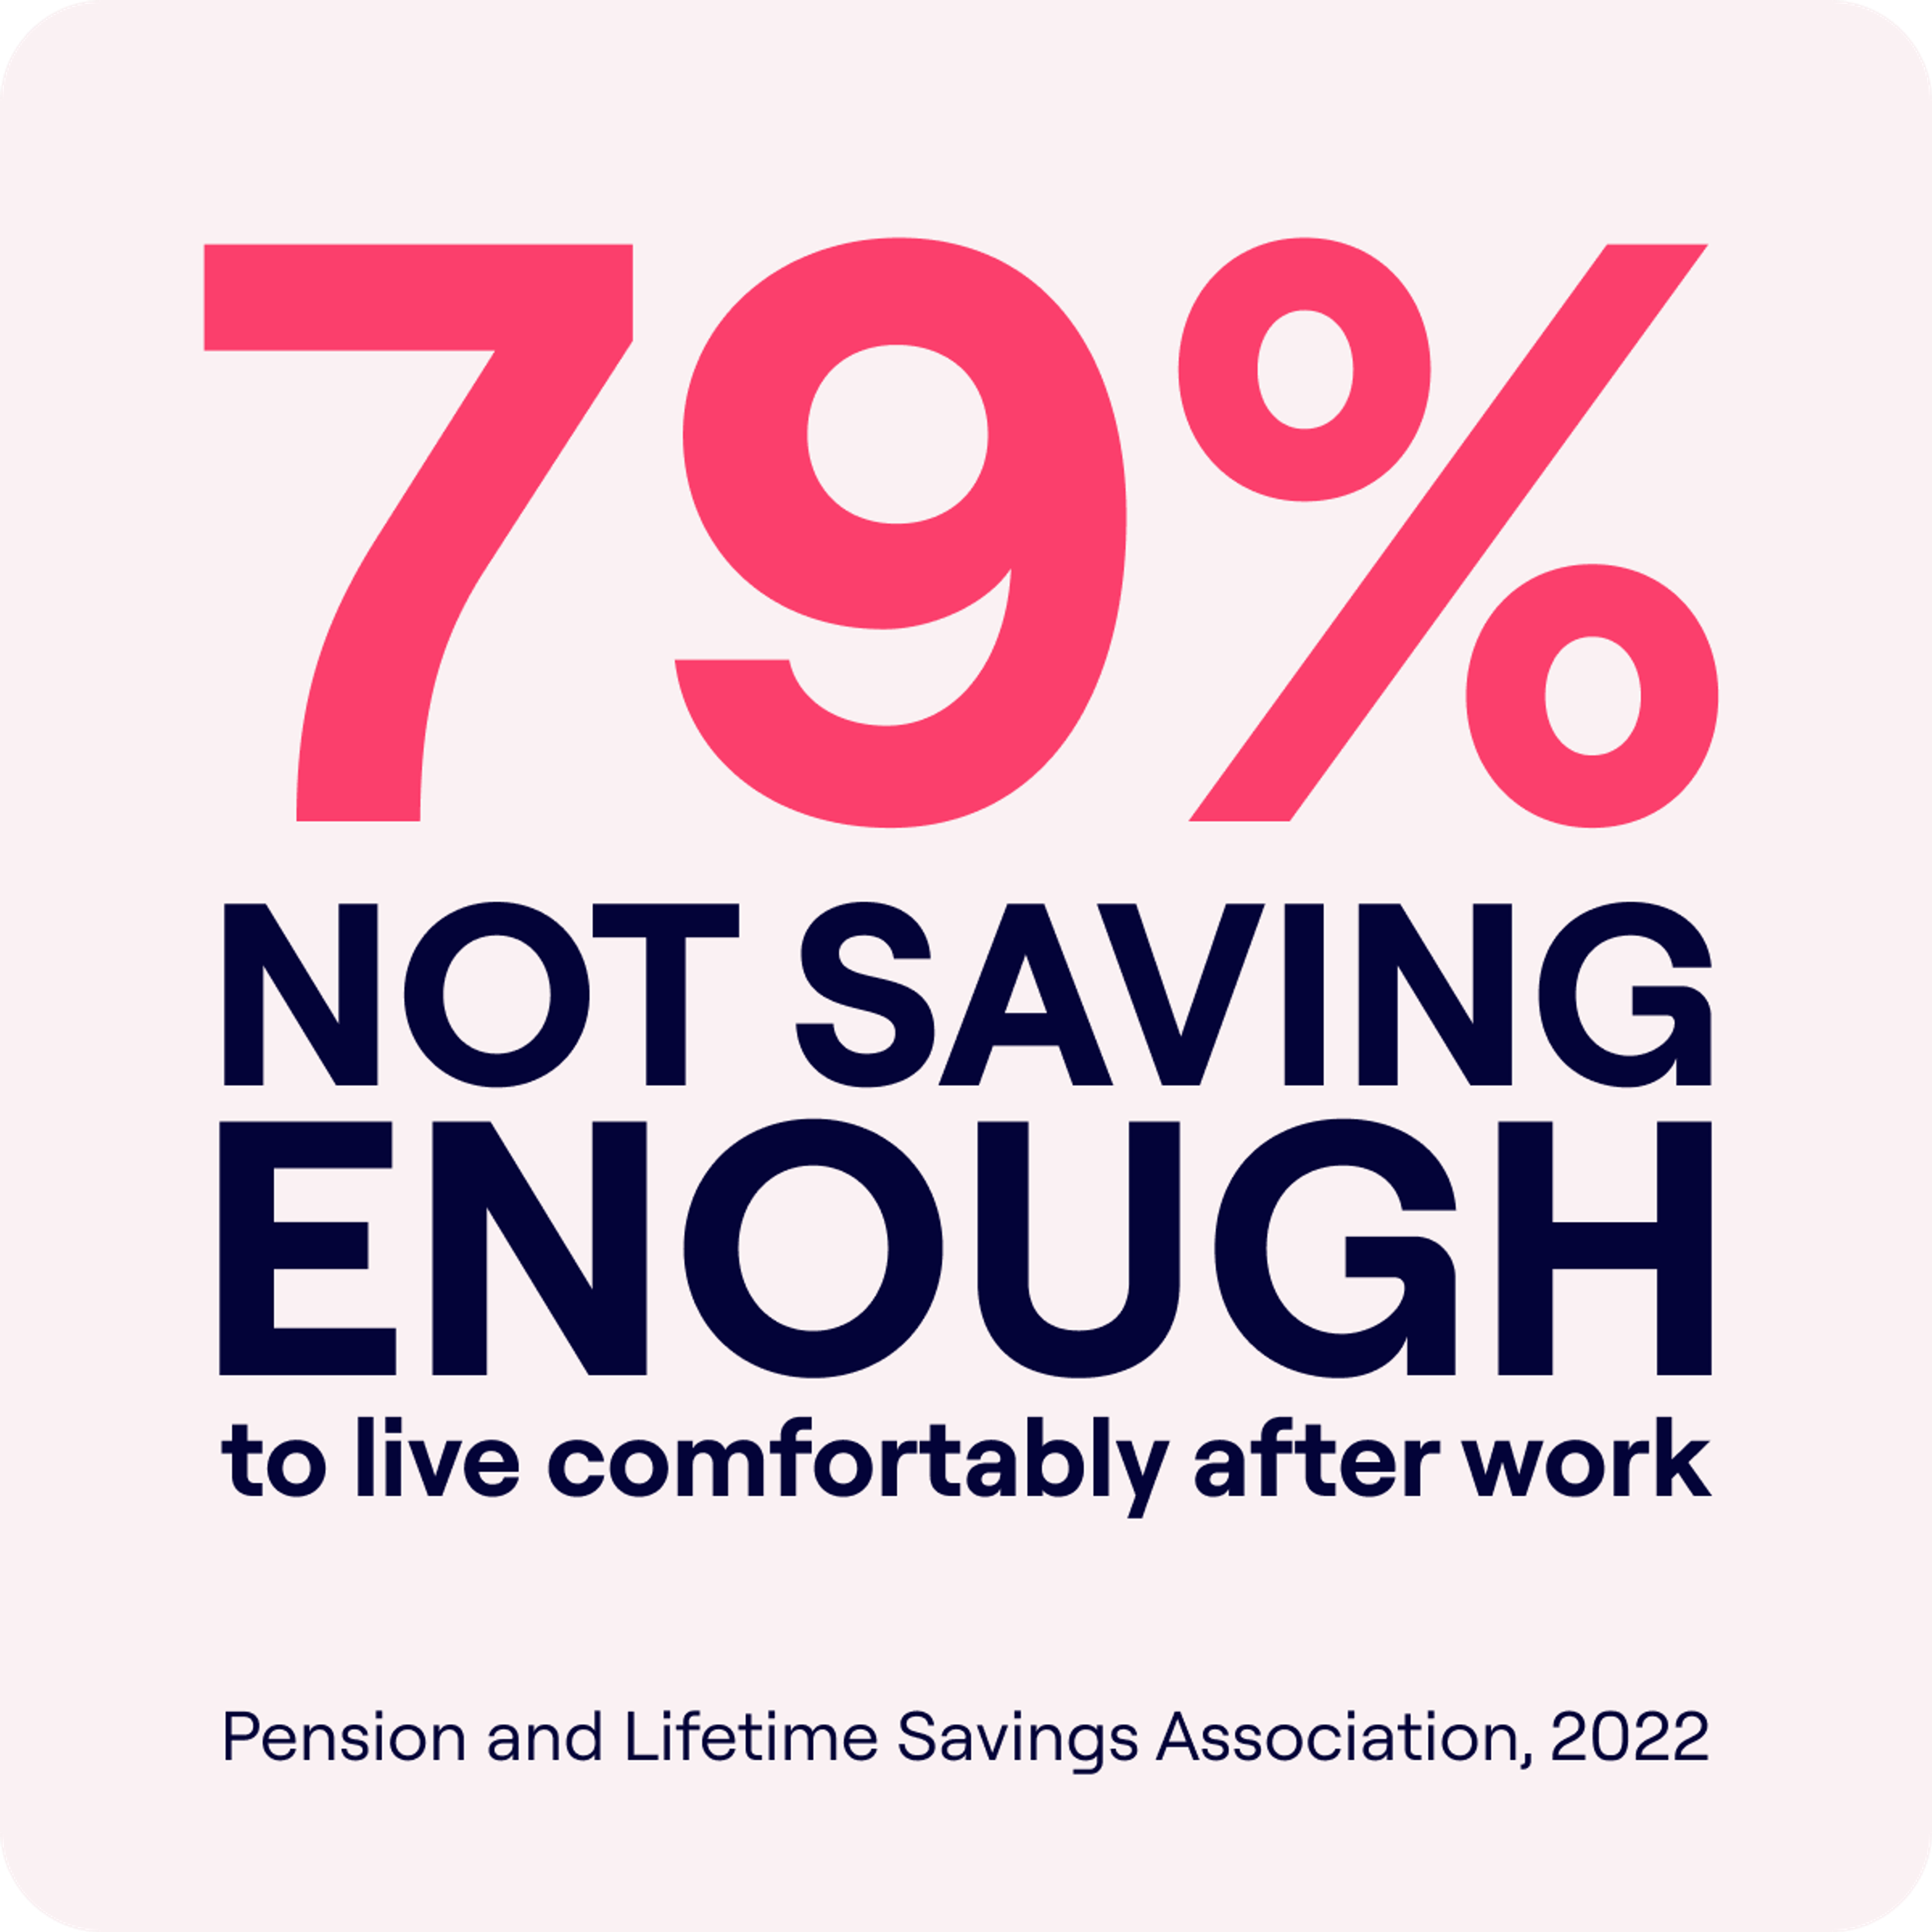 A striking statistic in bold typography states "79% NOT SAVING ENOUGH to live comfortably after work," with the percentage in large, pink numbers. Below, in smaller text, it attributes the source: "Pension and Lifetime Savings Association, 2022." 